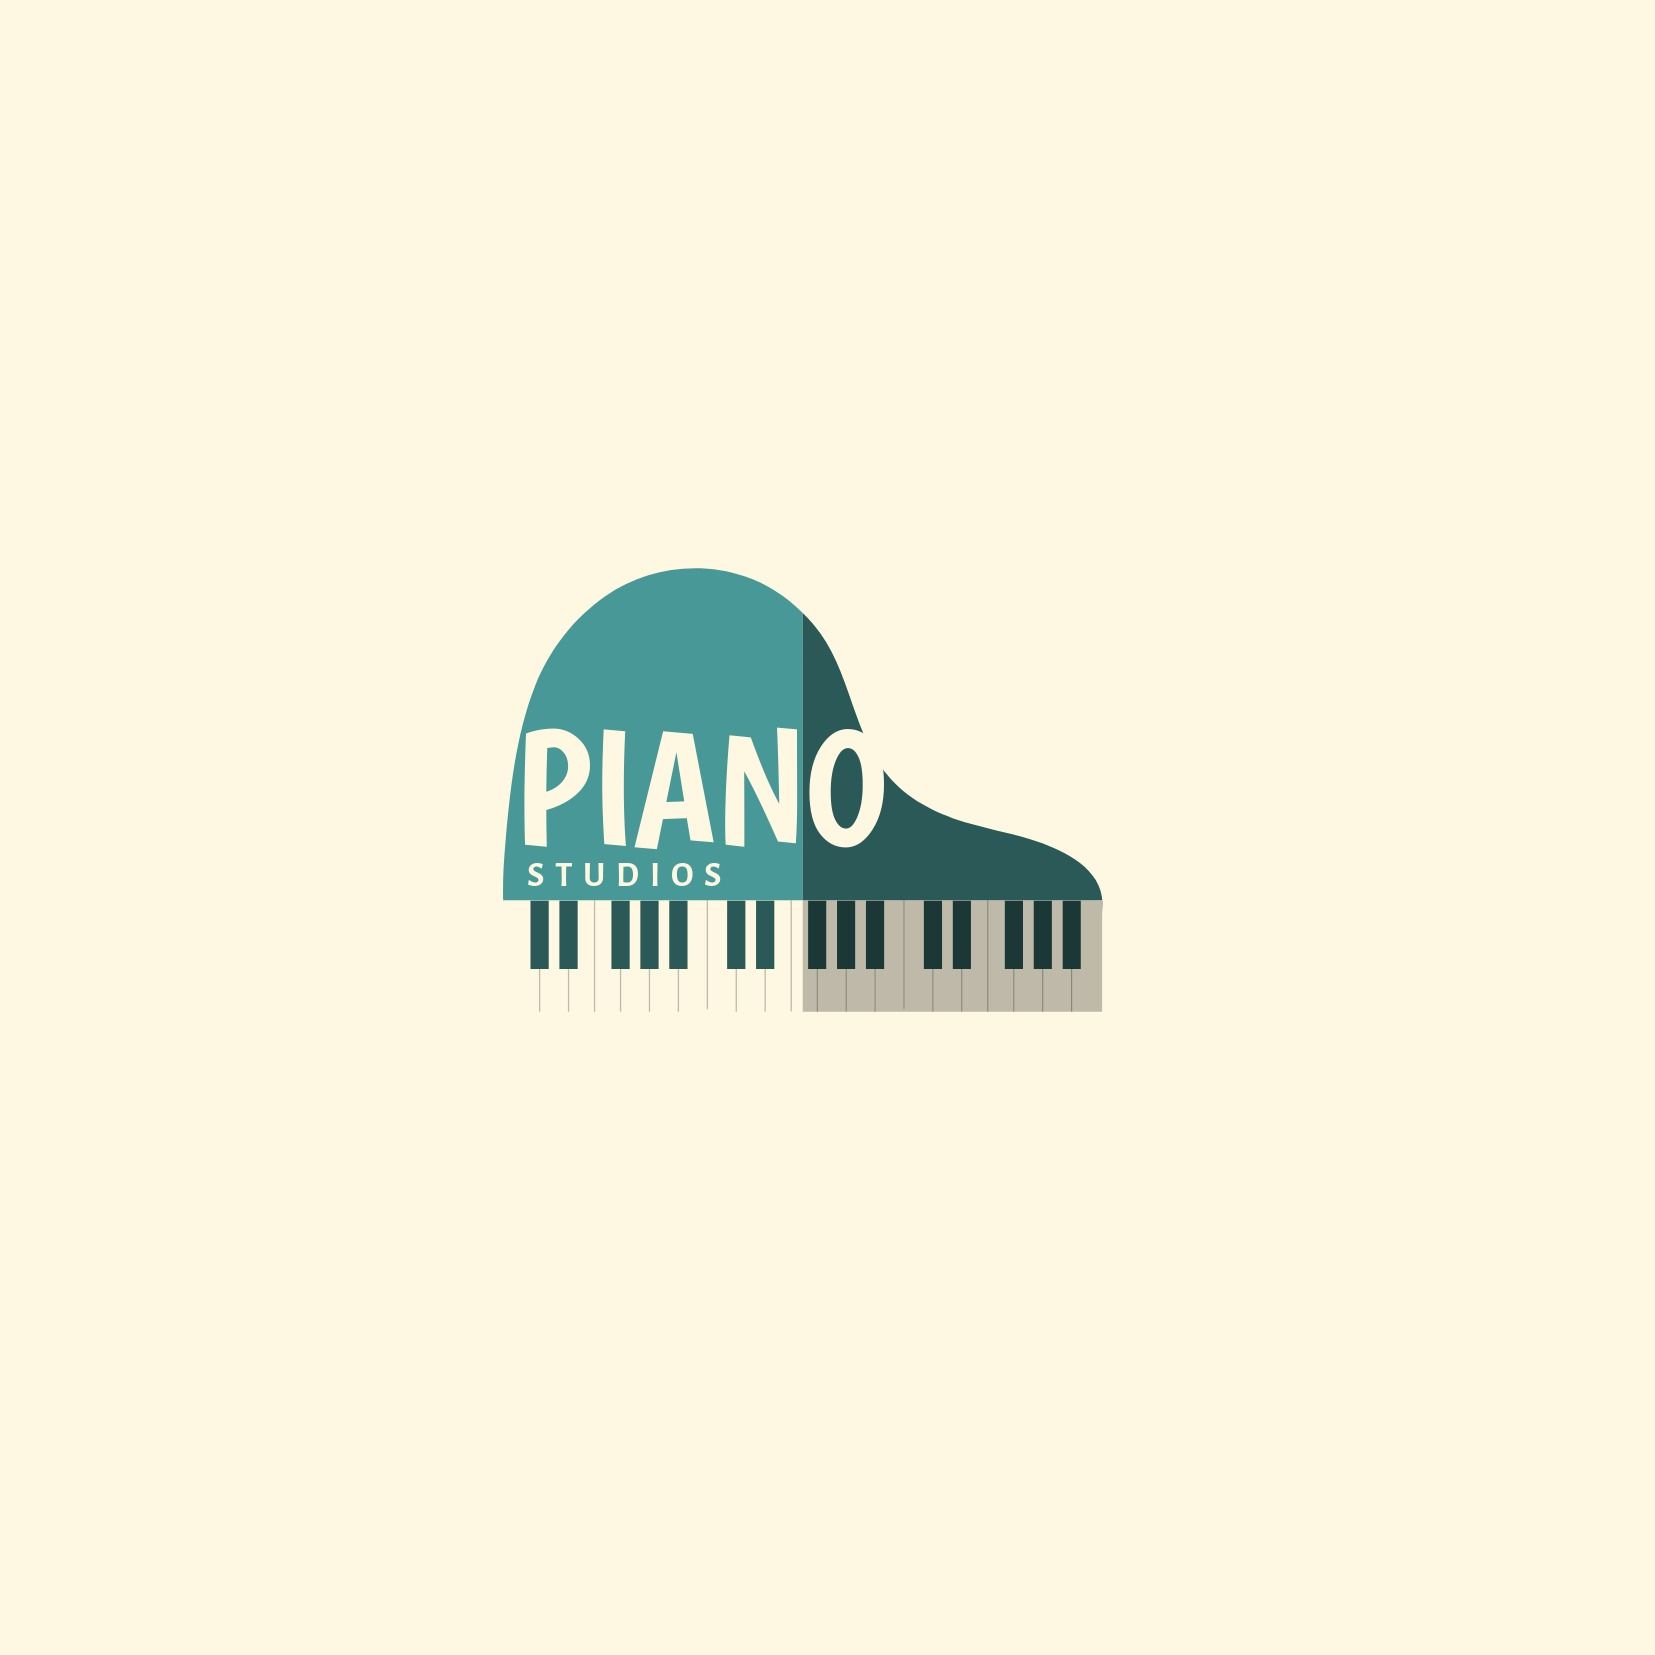 Piano studio logo with turquoise piano on a light background - Using the Boogaloo font - Image